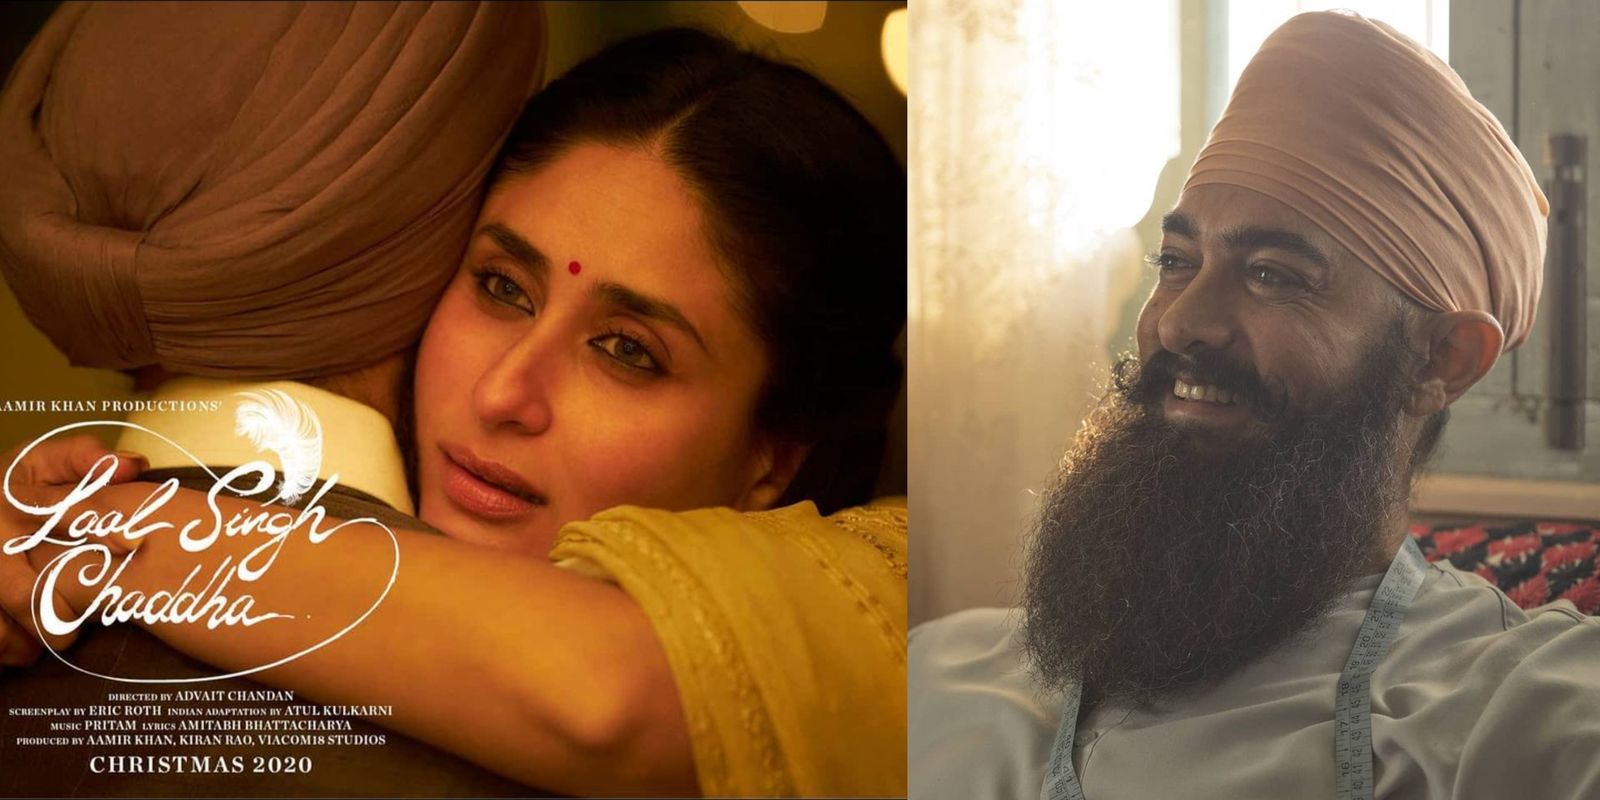 Laal Singh Chaddha: Kareena Shares The Sweetest Wish On Aamir Khan’s 56th Along With A Special Still From The Film